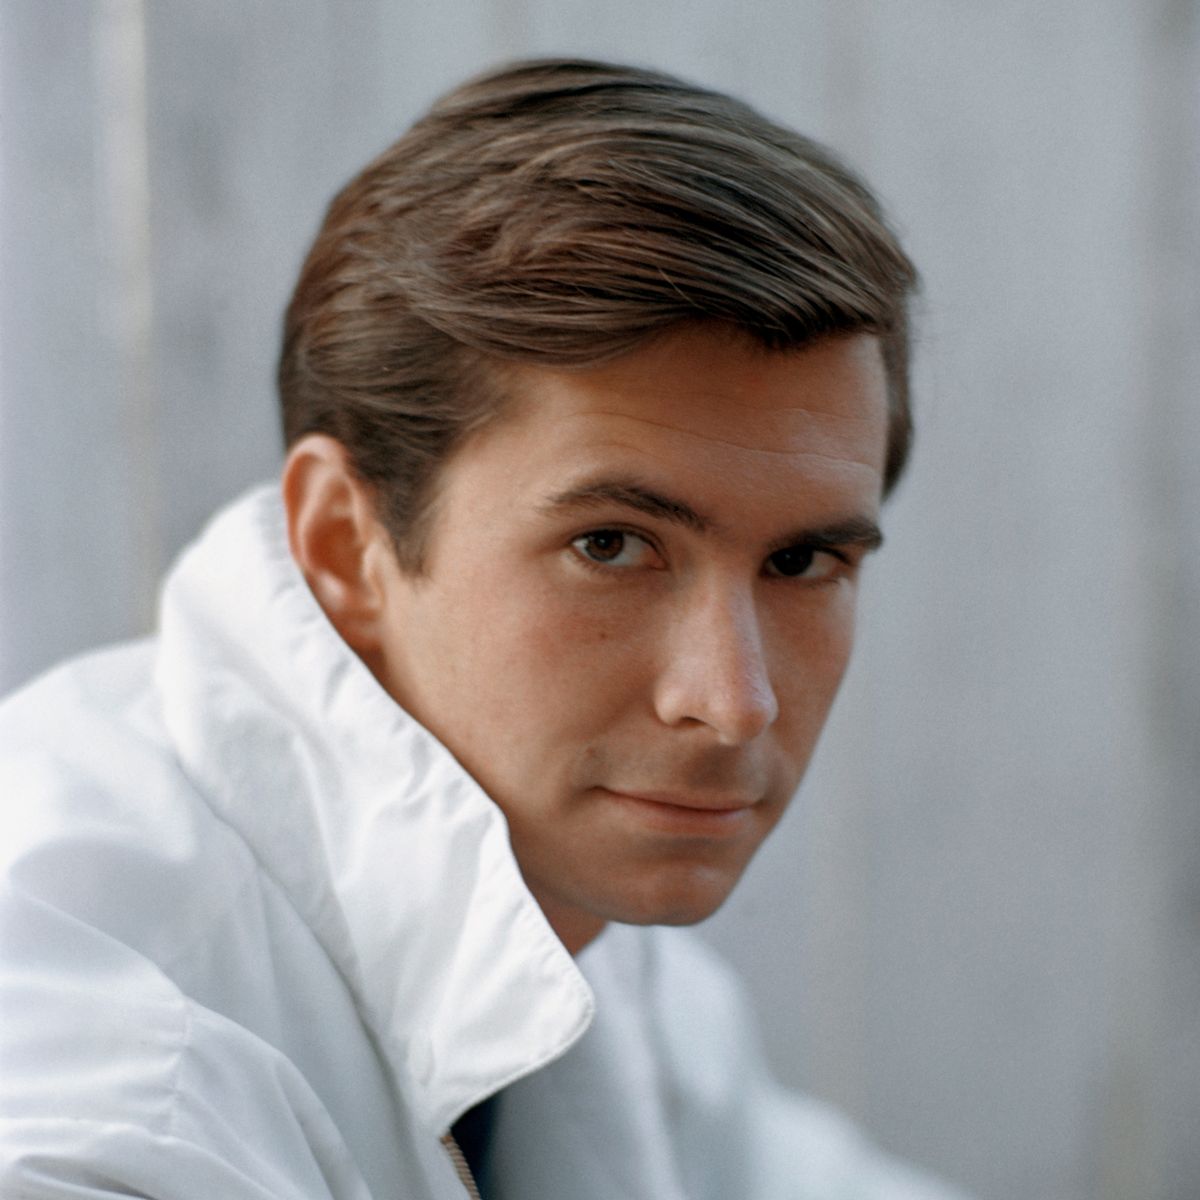 Anthony Perkins Portrait SessionLOS ANGELES - 1958: Actor Anthony Perkins poses for a portrait at home in 1958 in Los Angeles, California. (Photo by Richard C. Miller/Donaldson Collection/Getty Images)